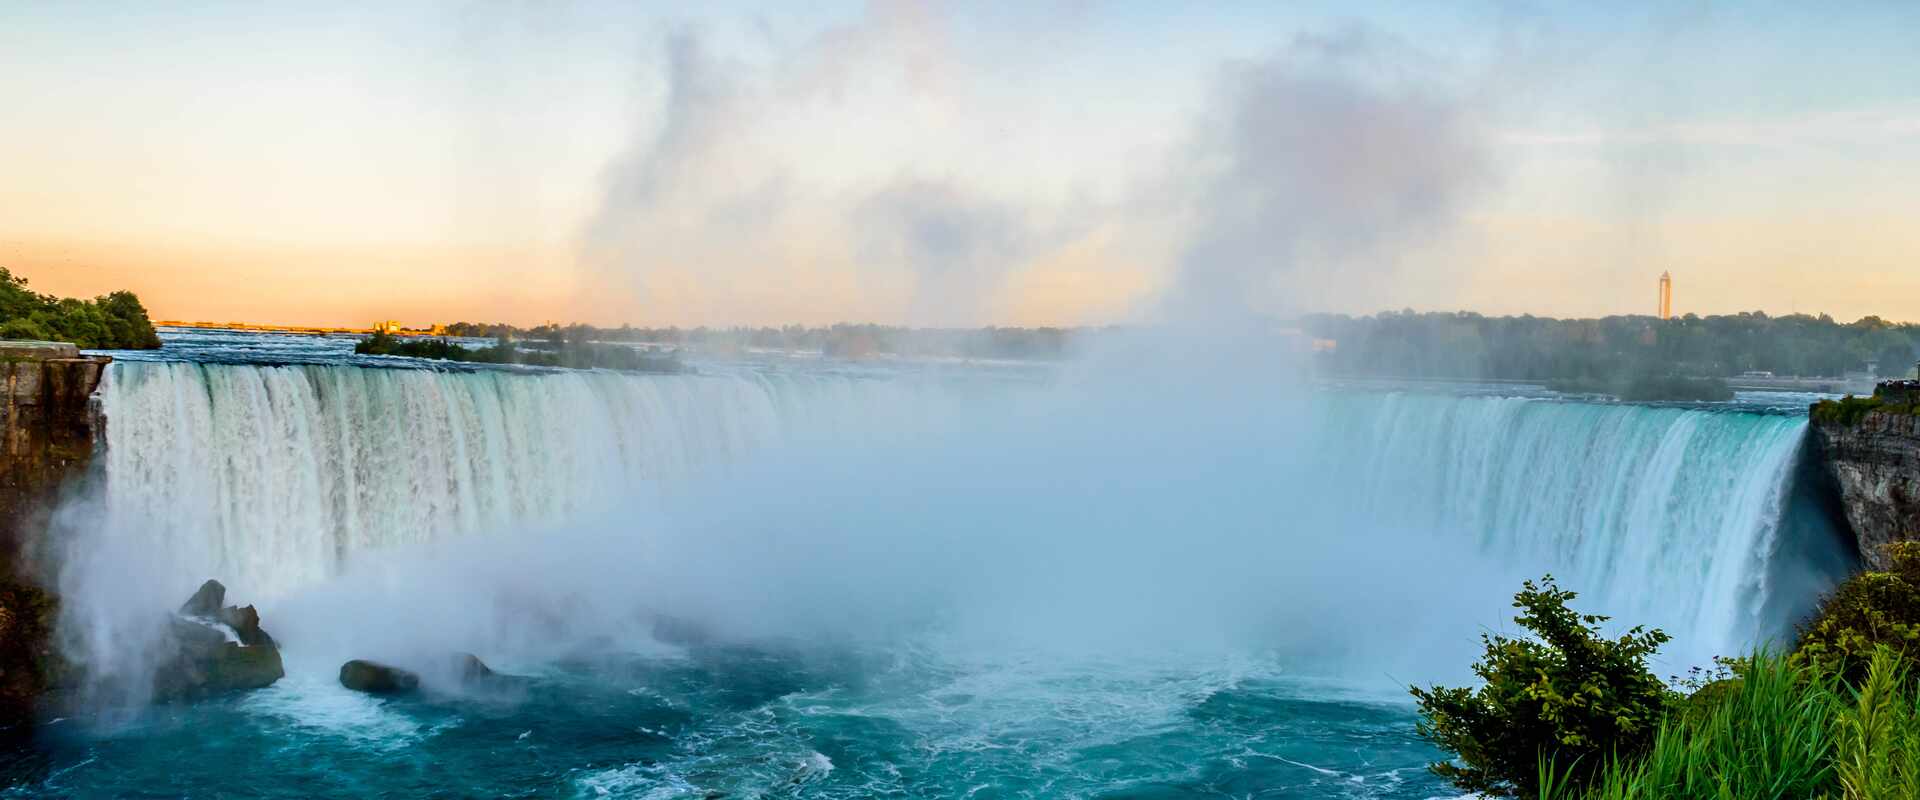 Niagara Falls surrounded by mist